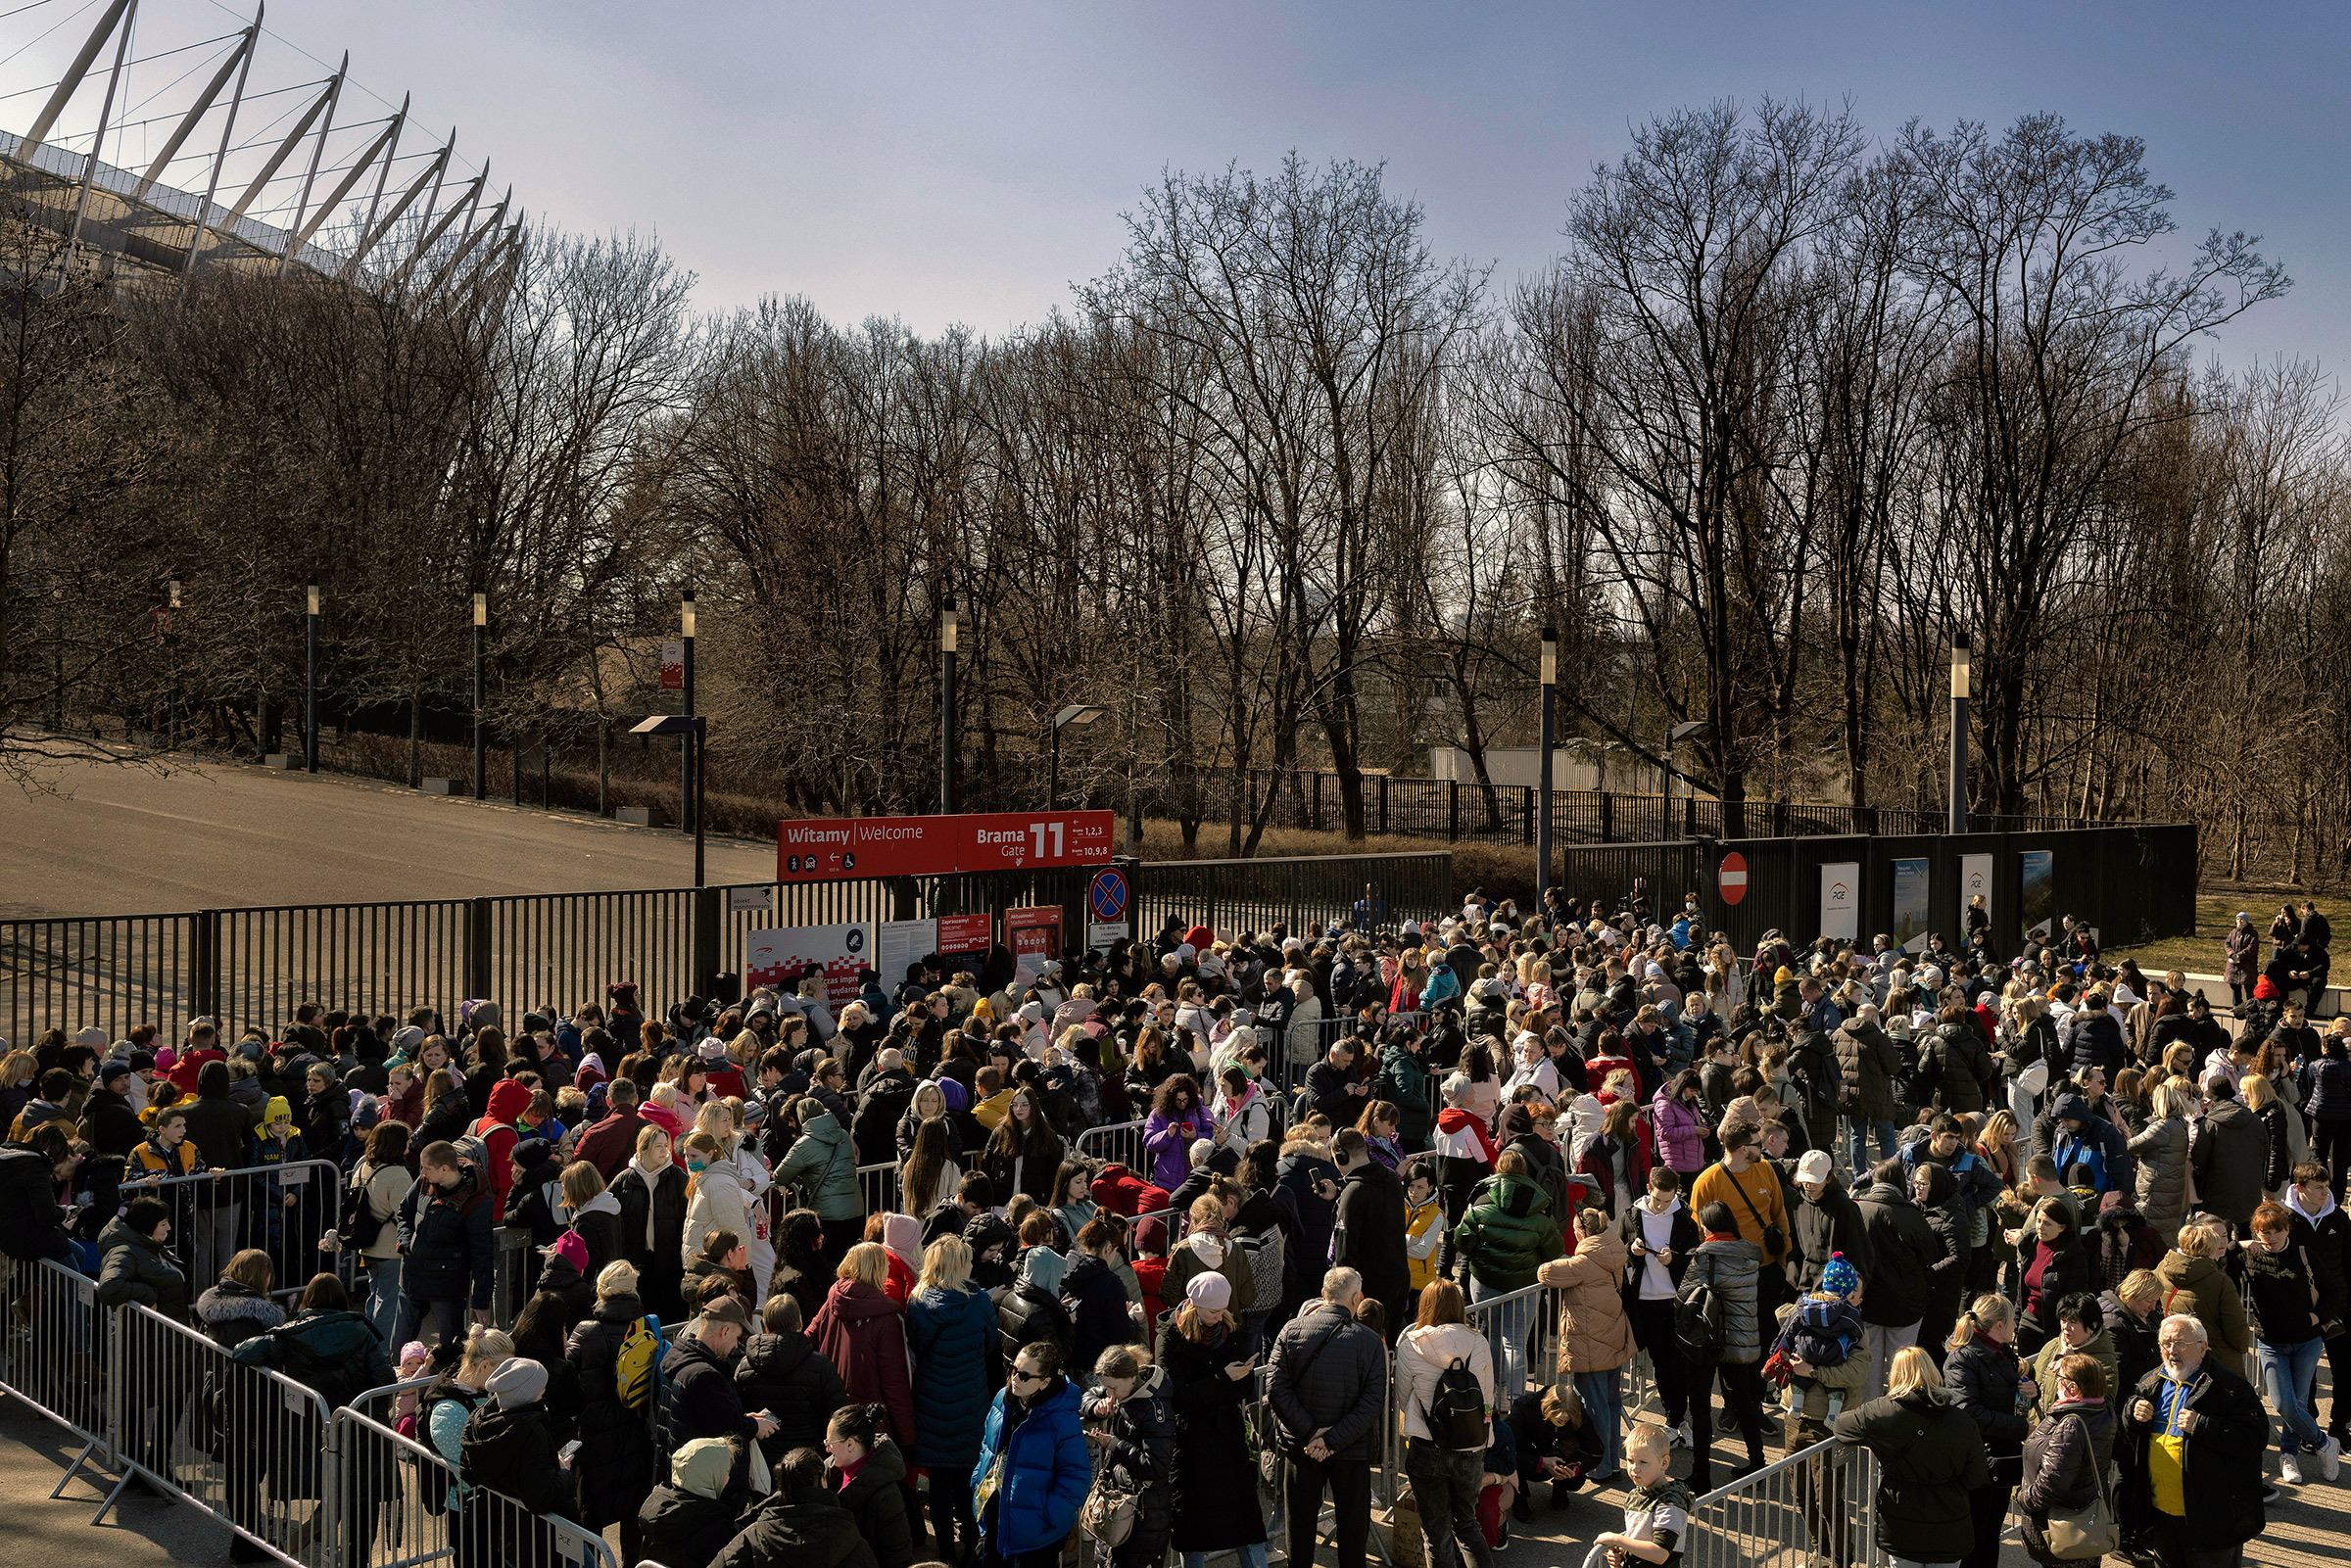 Refugees from Ukraine wait in line for identification documents outside the National Stadium in Warsaw, Poland, on March 21. (Maciek Nabrdalik—The New York Times/Redux)